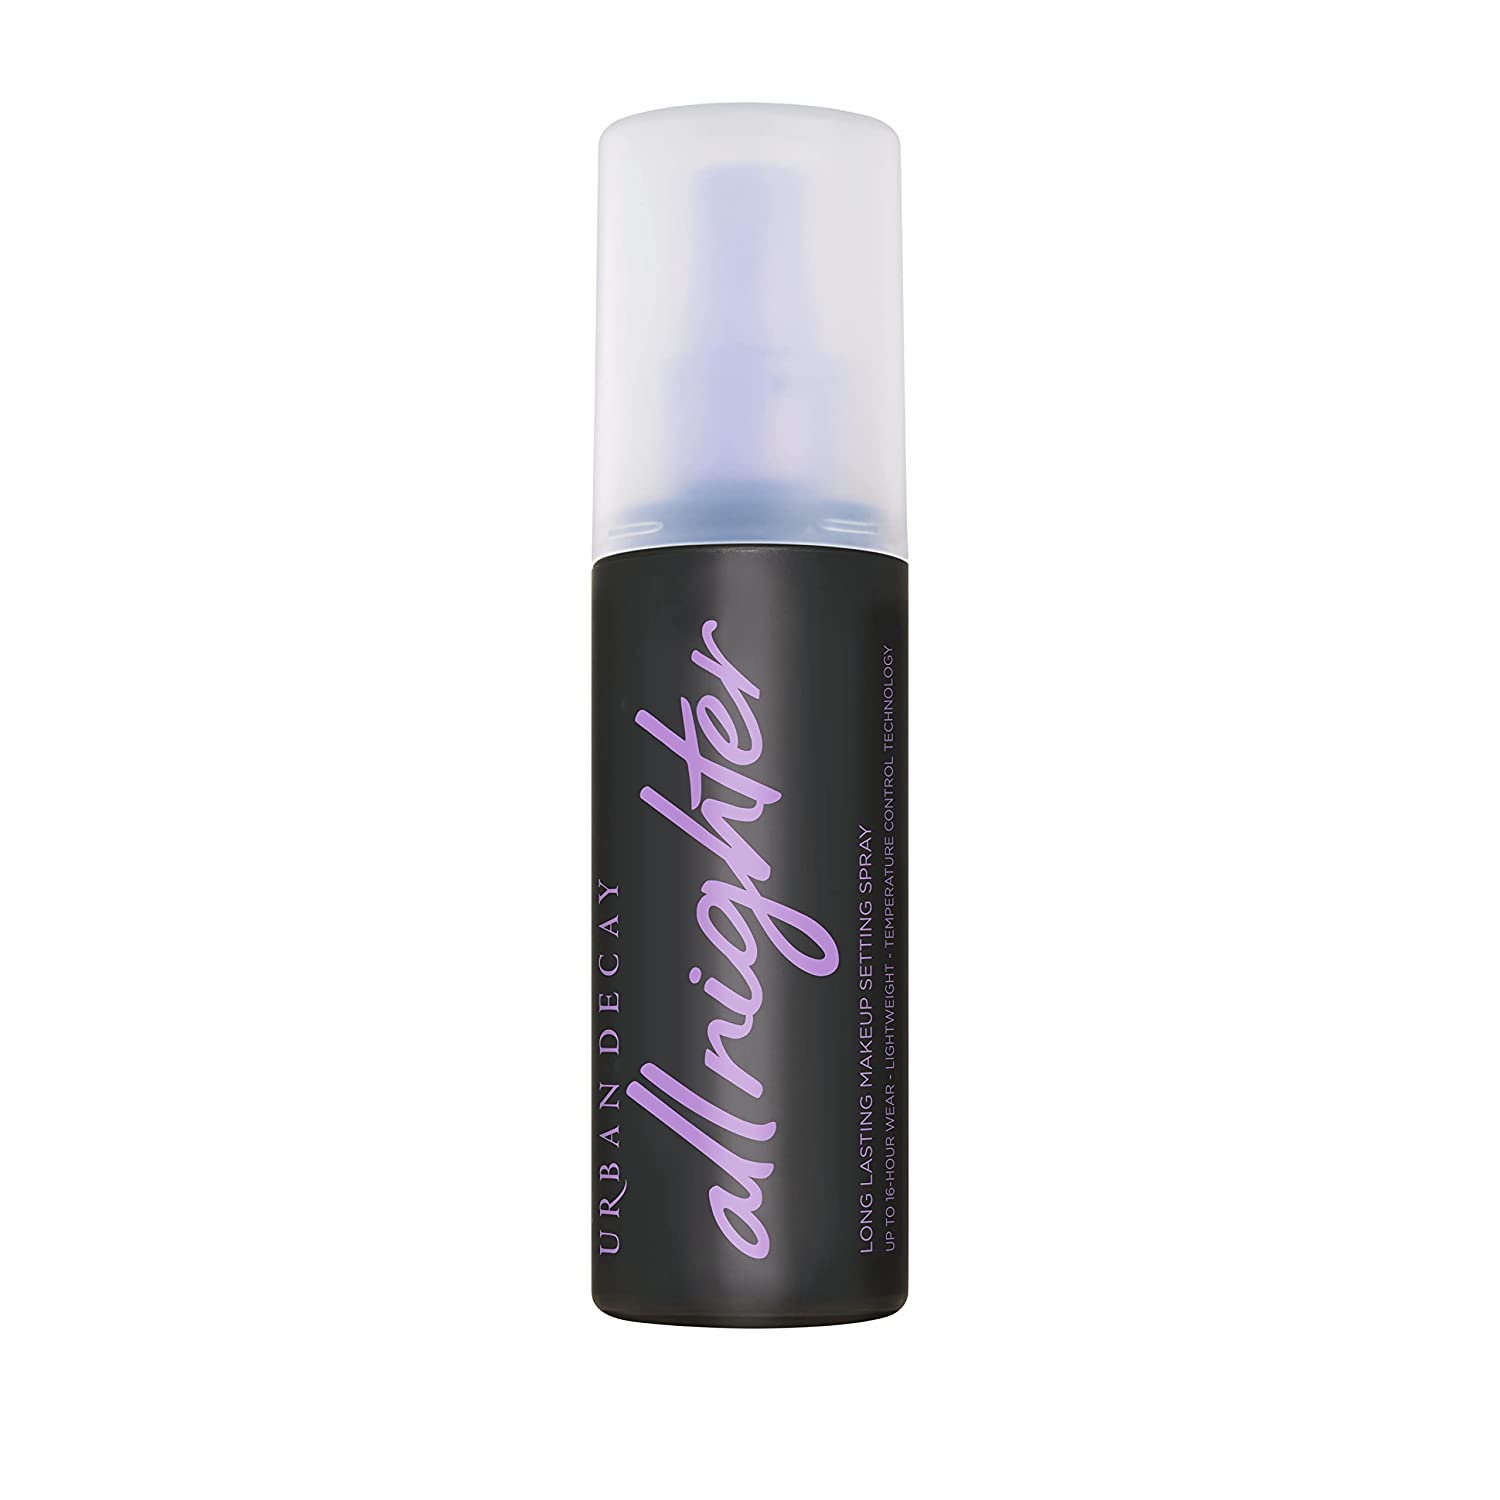 ''URBAN Decay All Nighter Long Lasting Makeup Setting Spray, 4 Ounce''